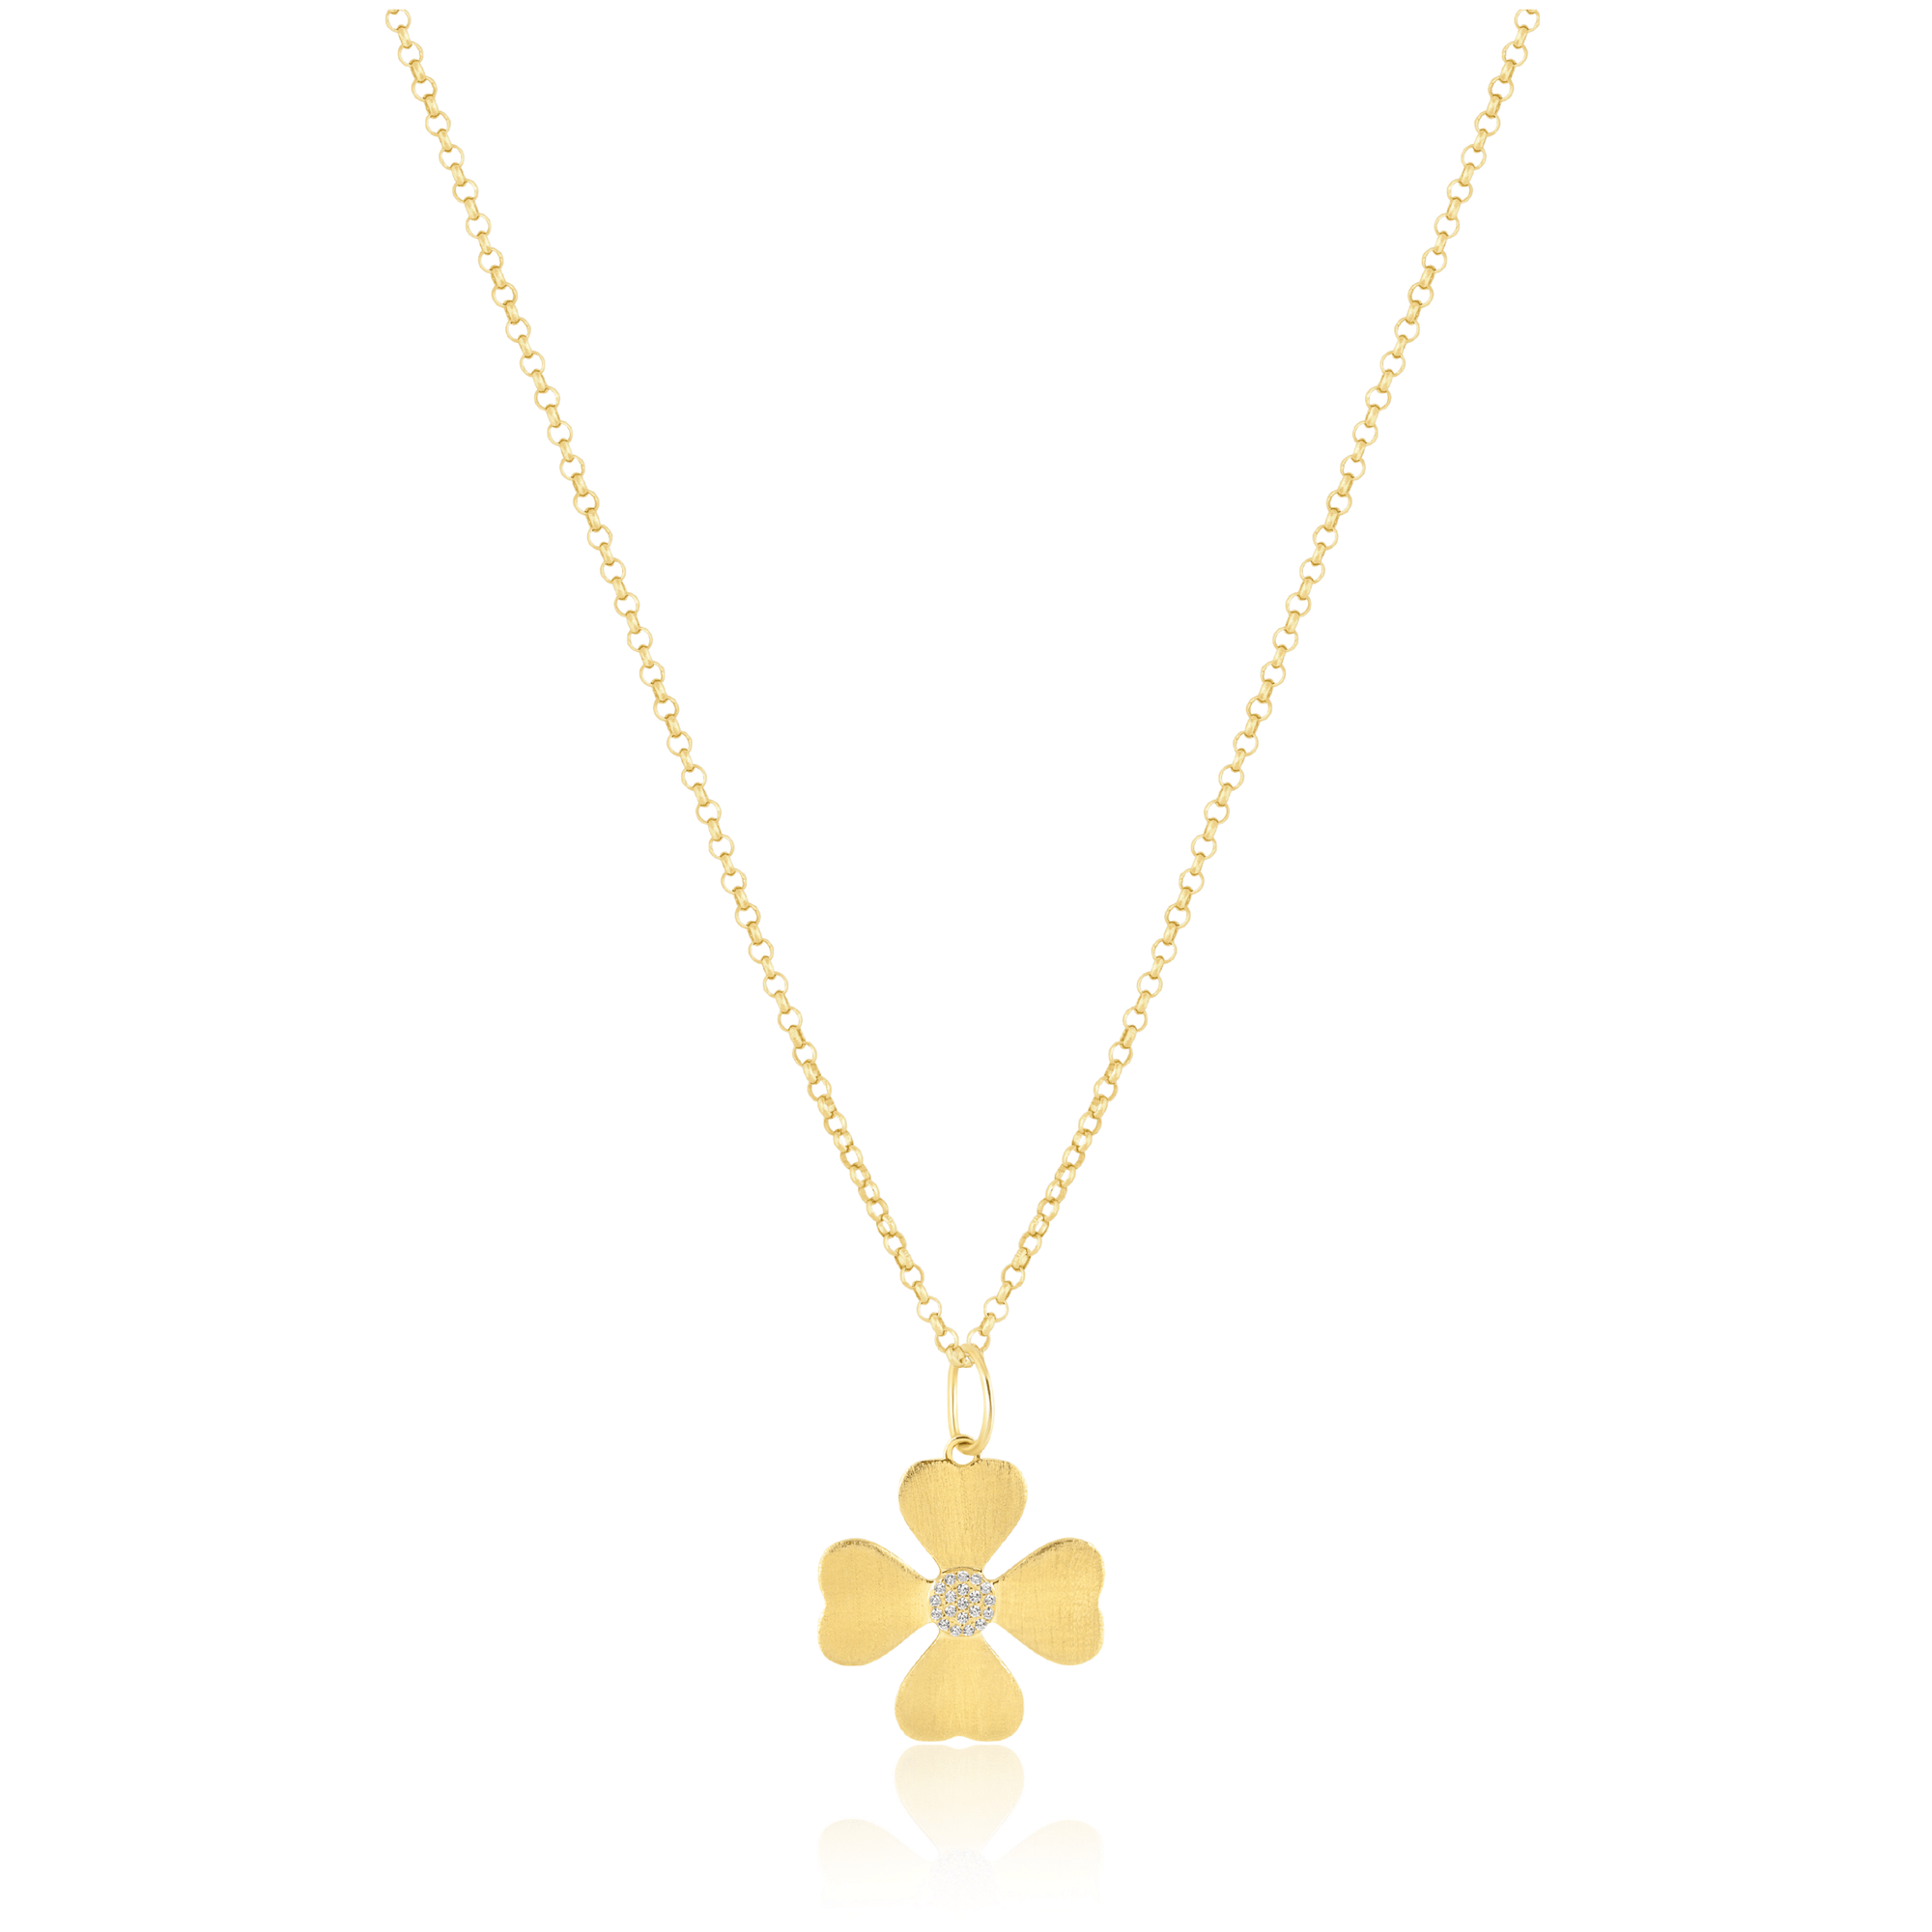 clover charm necklace